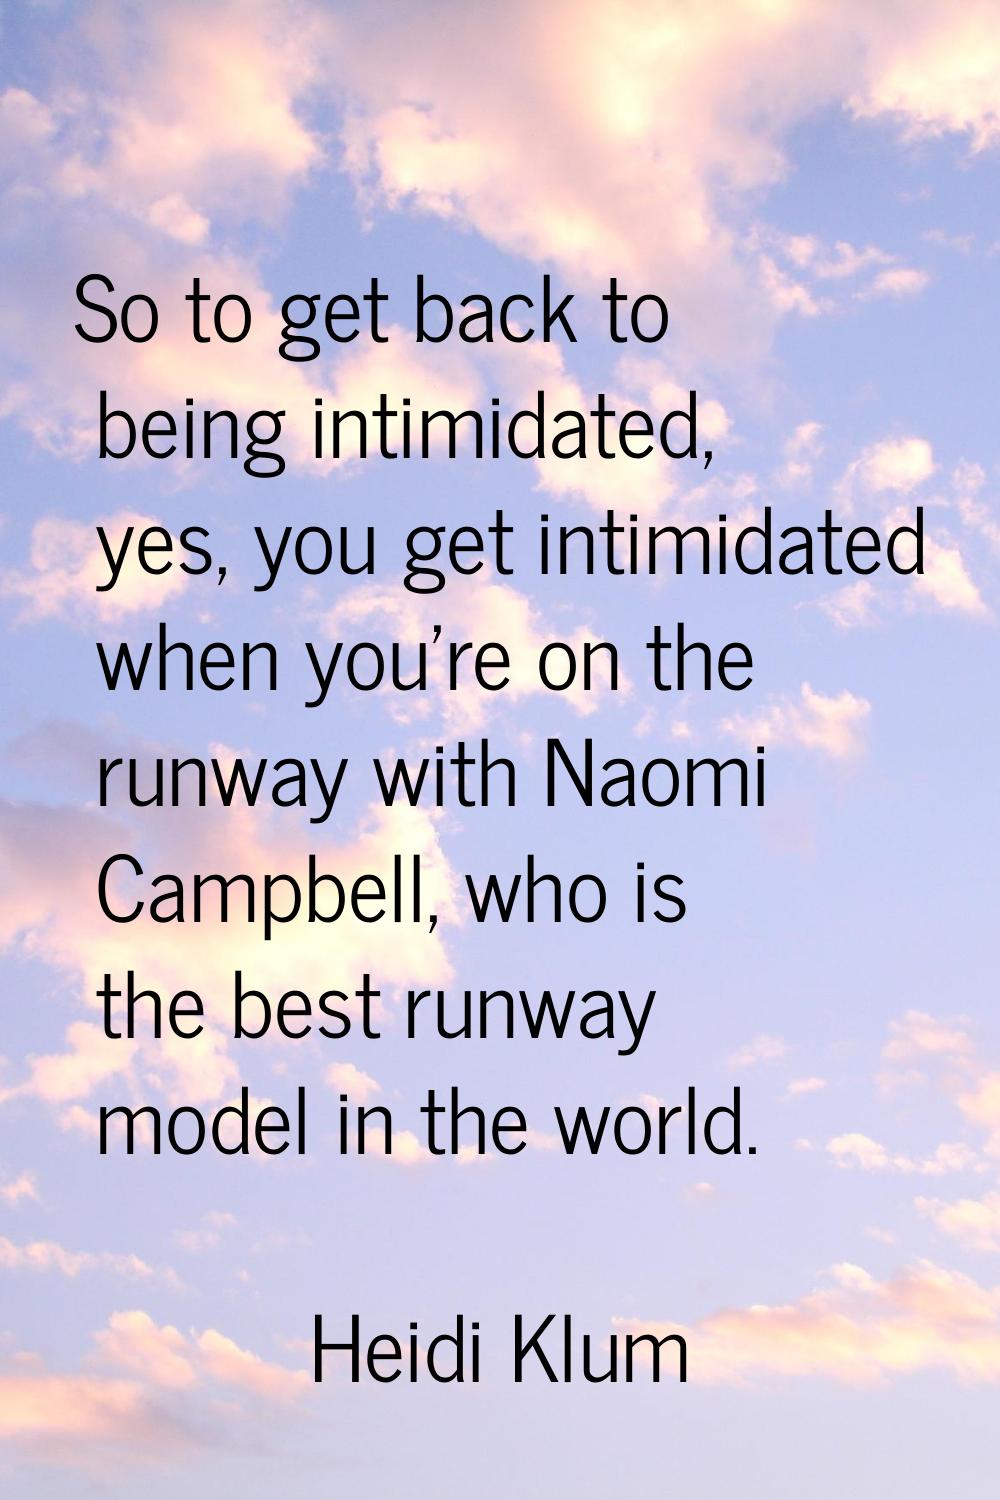 So to get back to being intimidated, yes, you get intimidated when you're on the runway with Naomi 